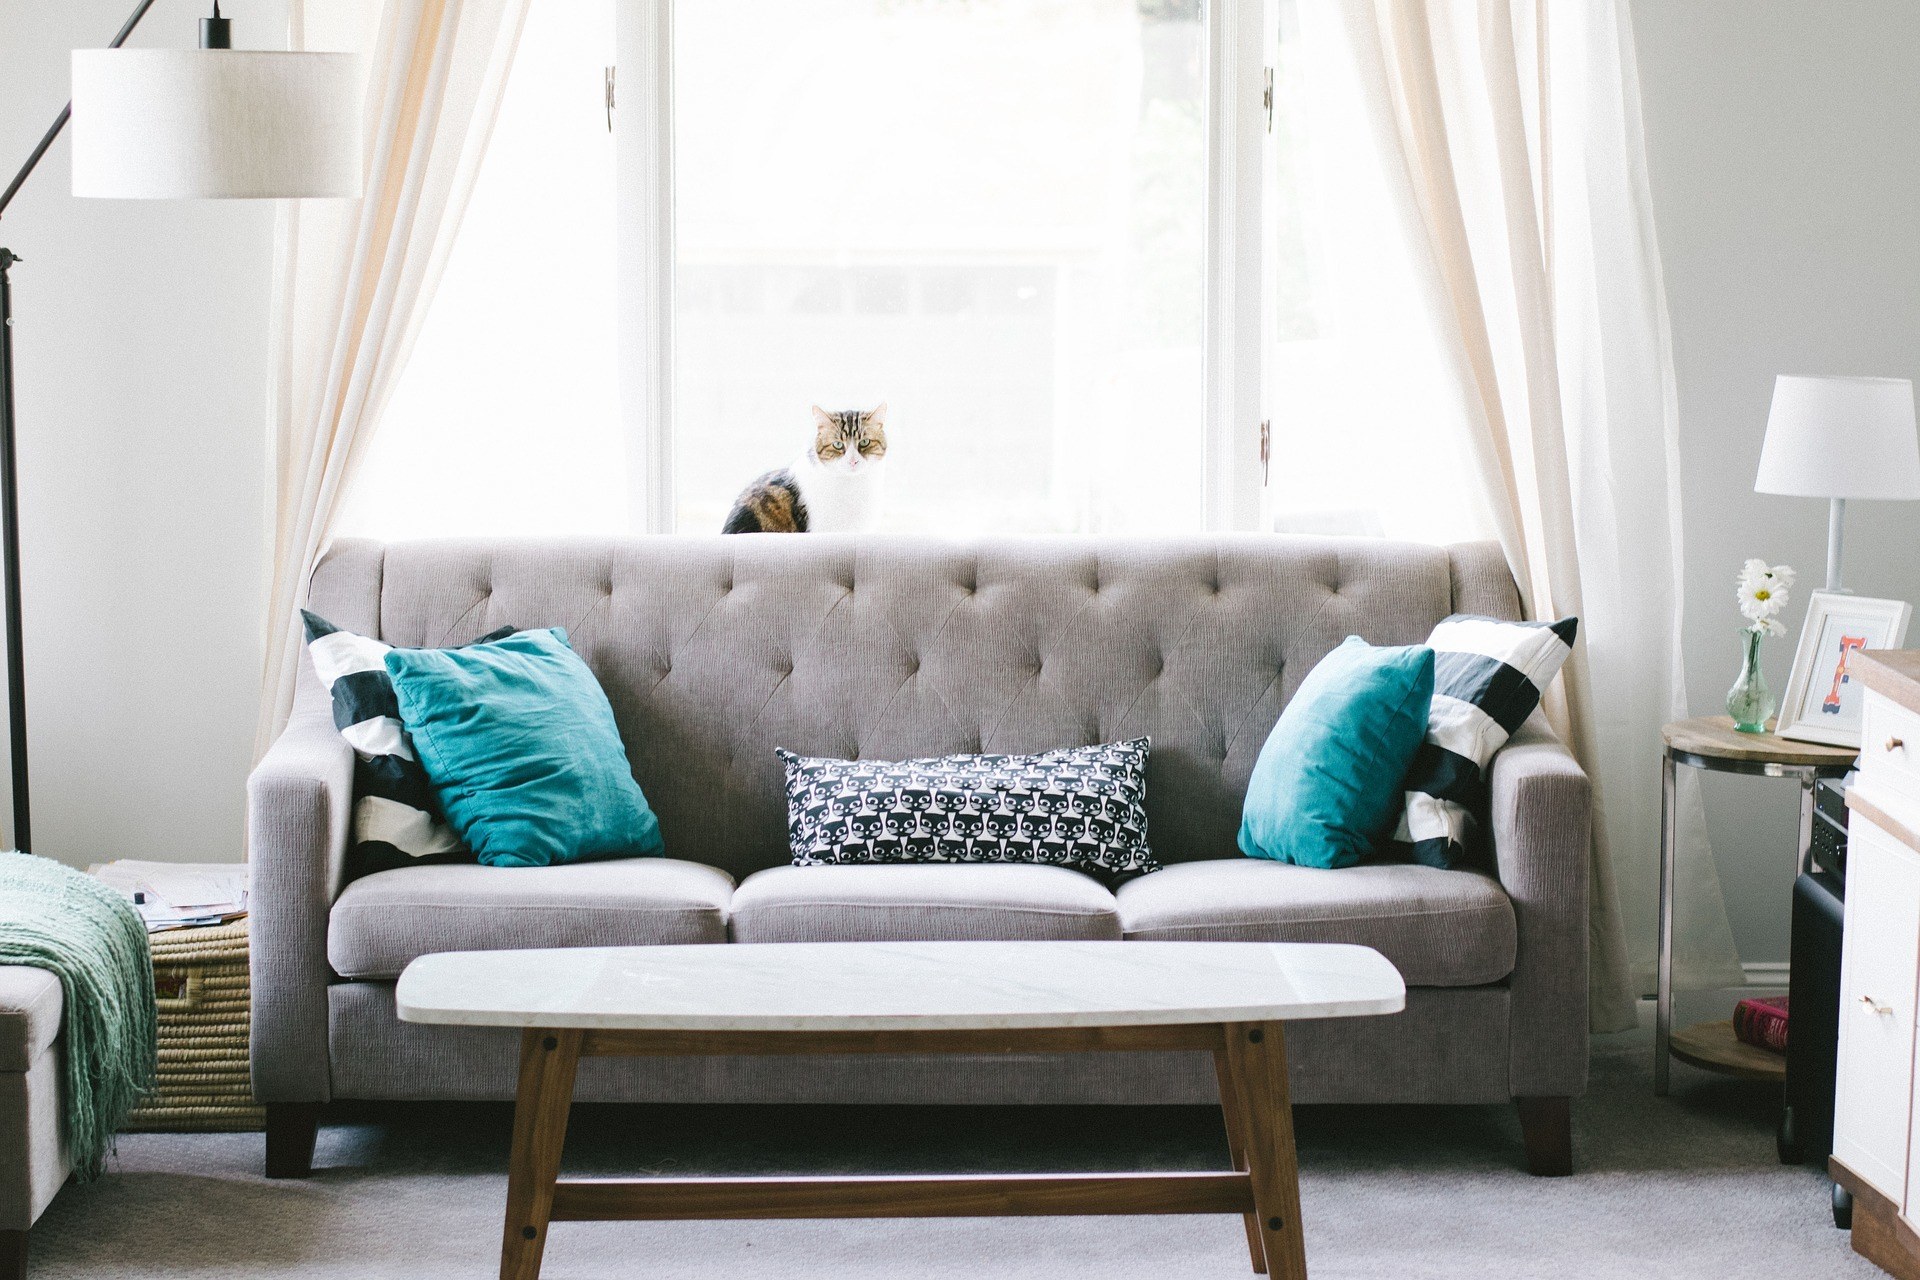 6 Essentials Your Home Needs To Ensure Total Comfort